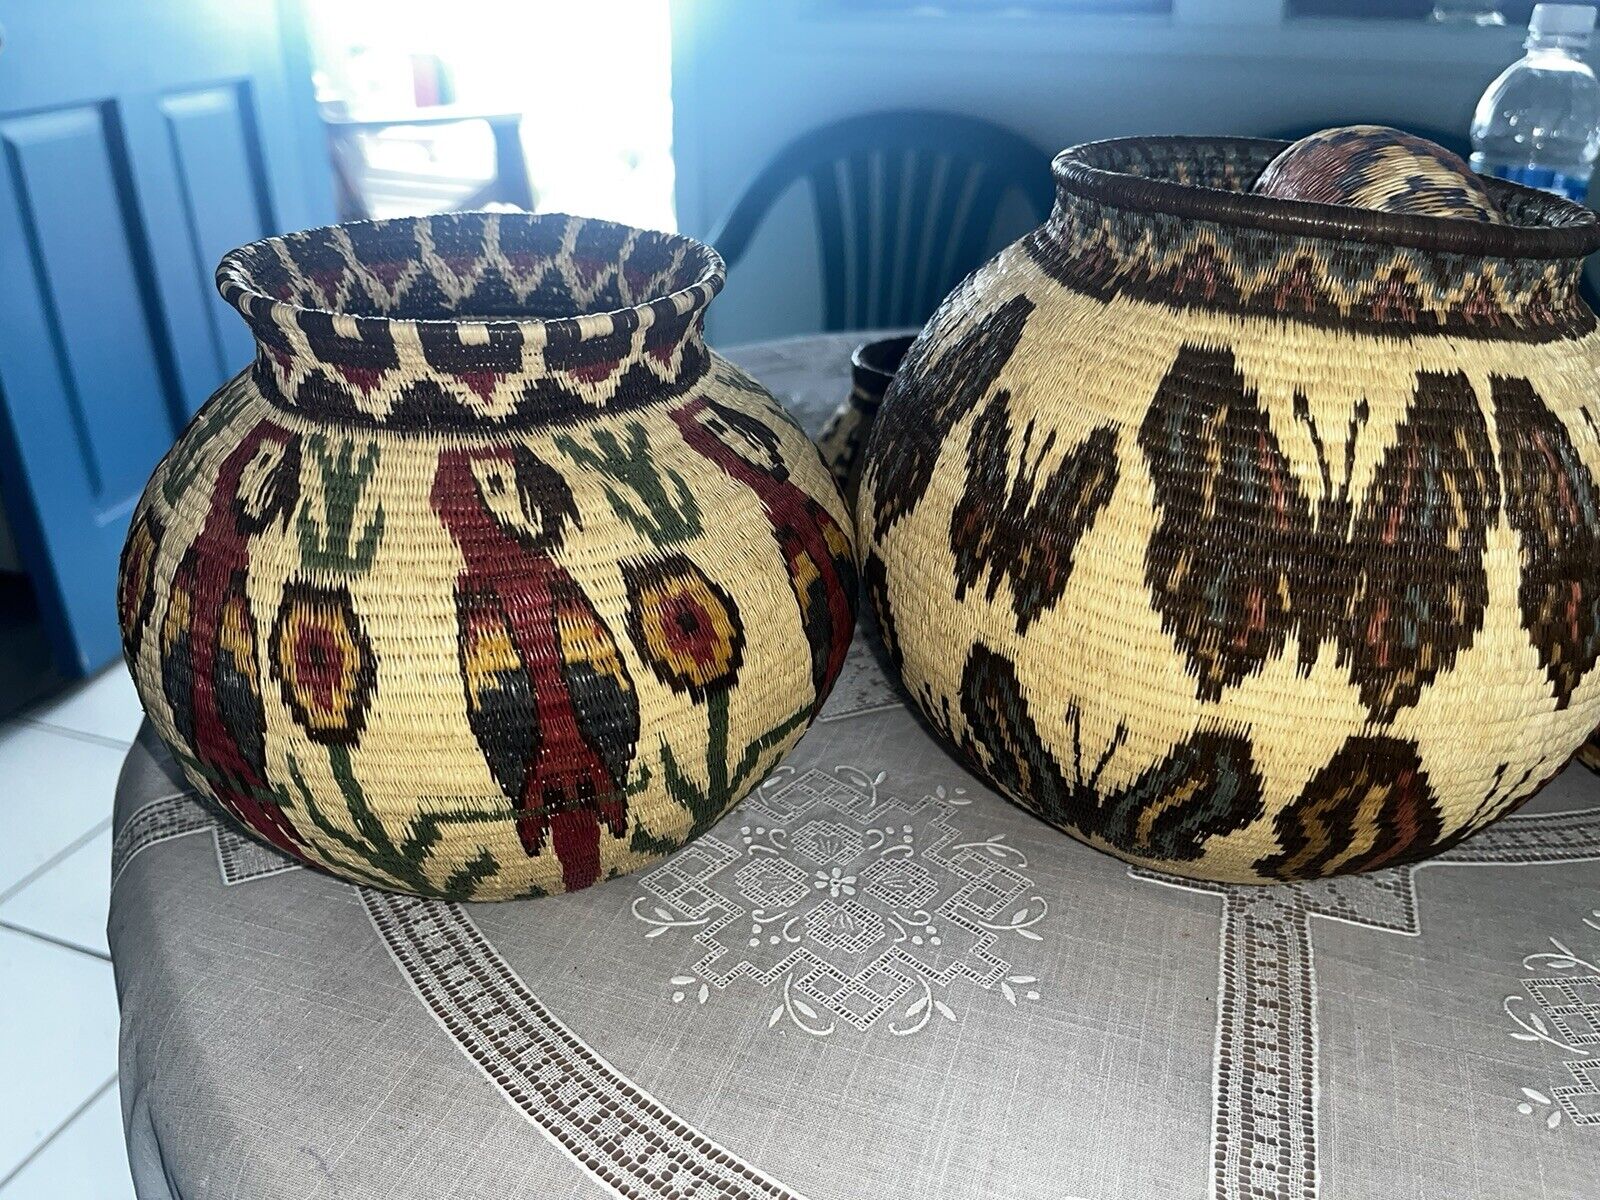 Vintage Handmade African Woven Baskets 8” Tightly Coiled Natural Grass